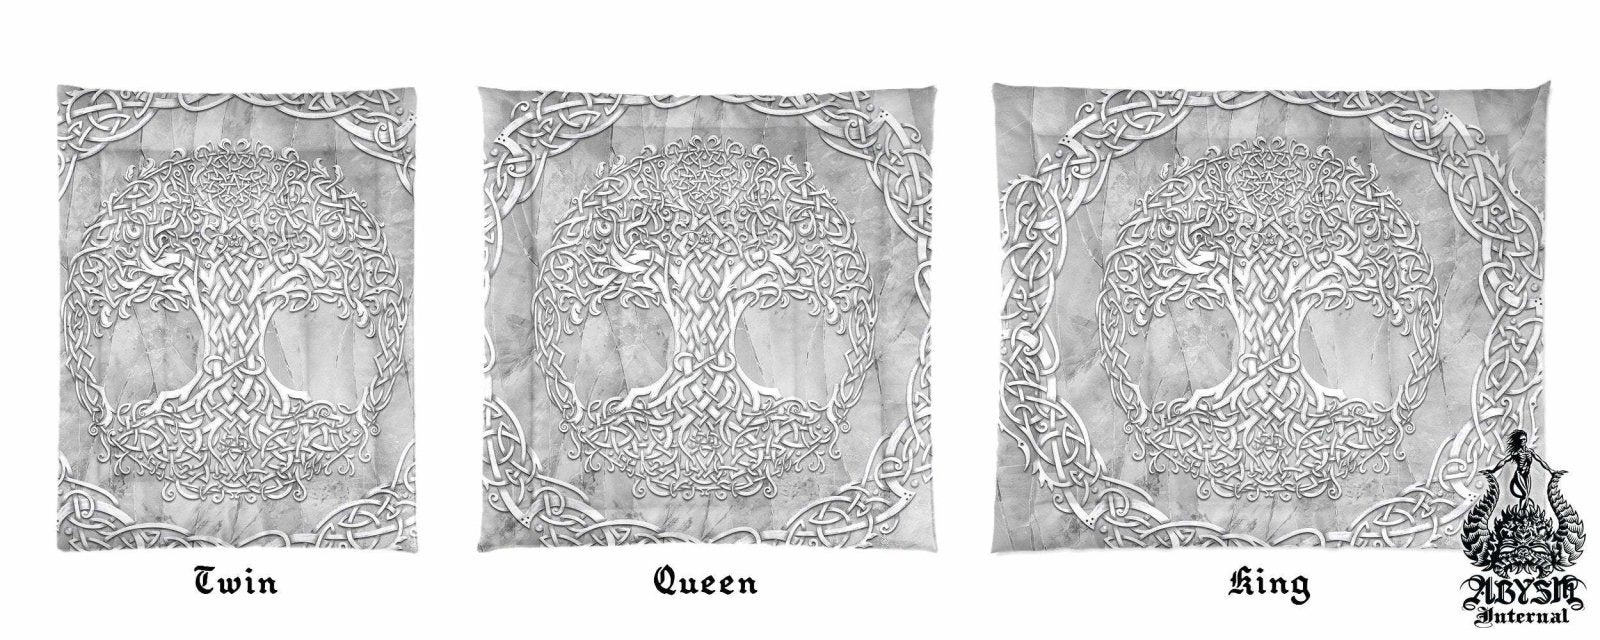 Celtic Bedding Set, Comforter and Duvet, Indie Bed Cover, Wiccan Bedroom Decor, King, Queen and Twin Size - Celtic, Tree of Life, Stone - Abysm Internal